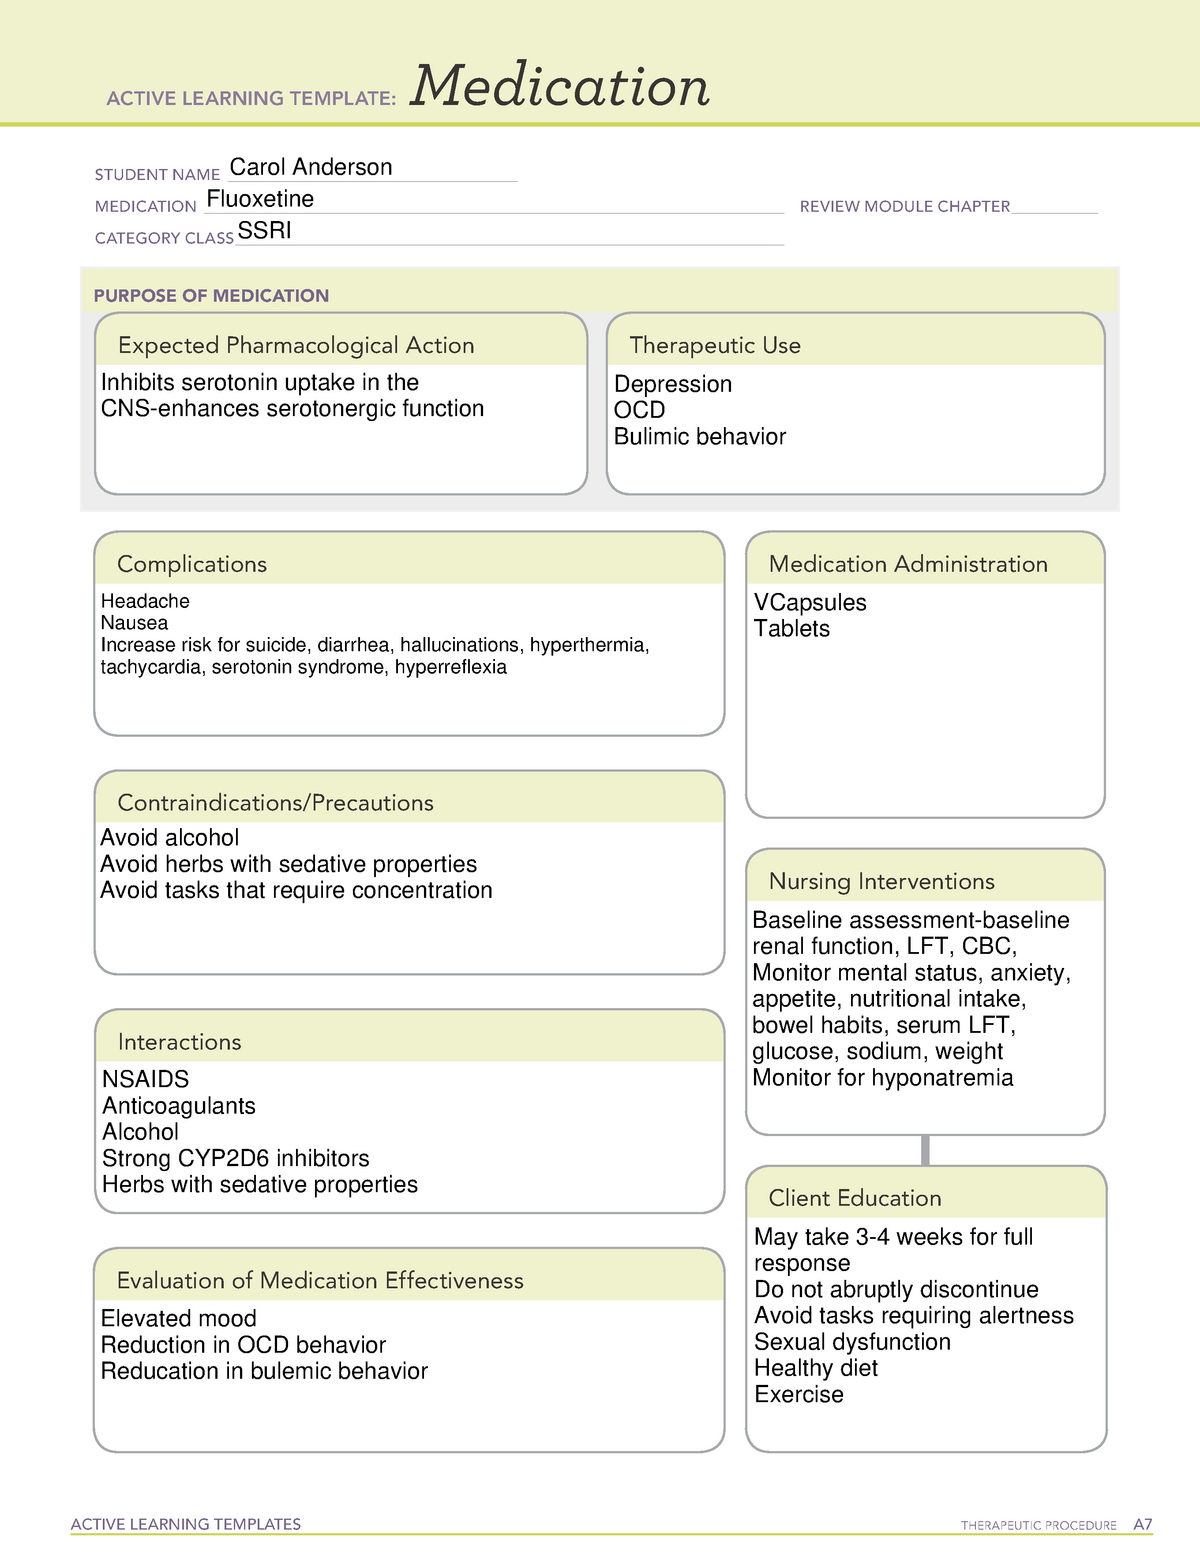 ATI ALT Medication Fluoxetine 08112021 ACTIVE LEARNING TEMPLATES